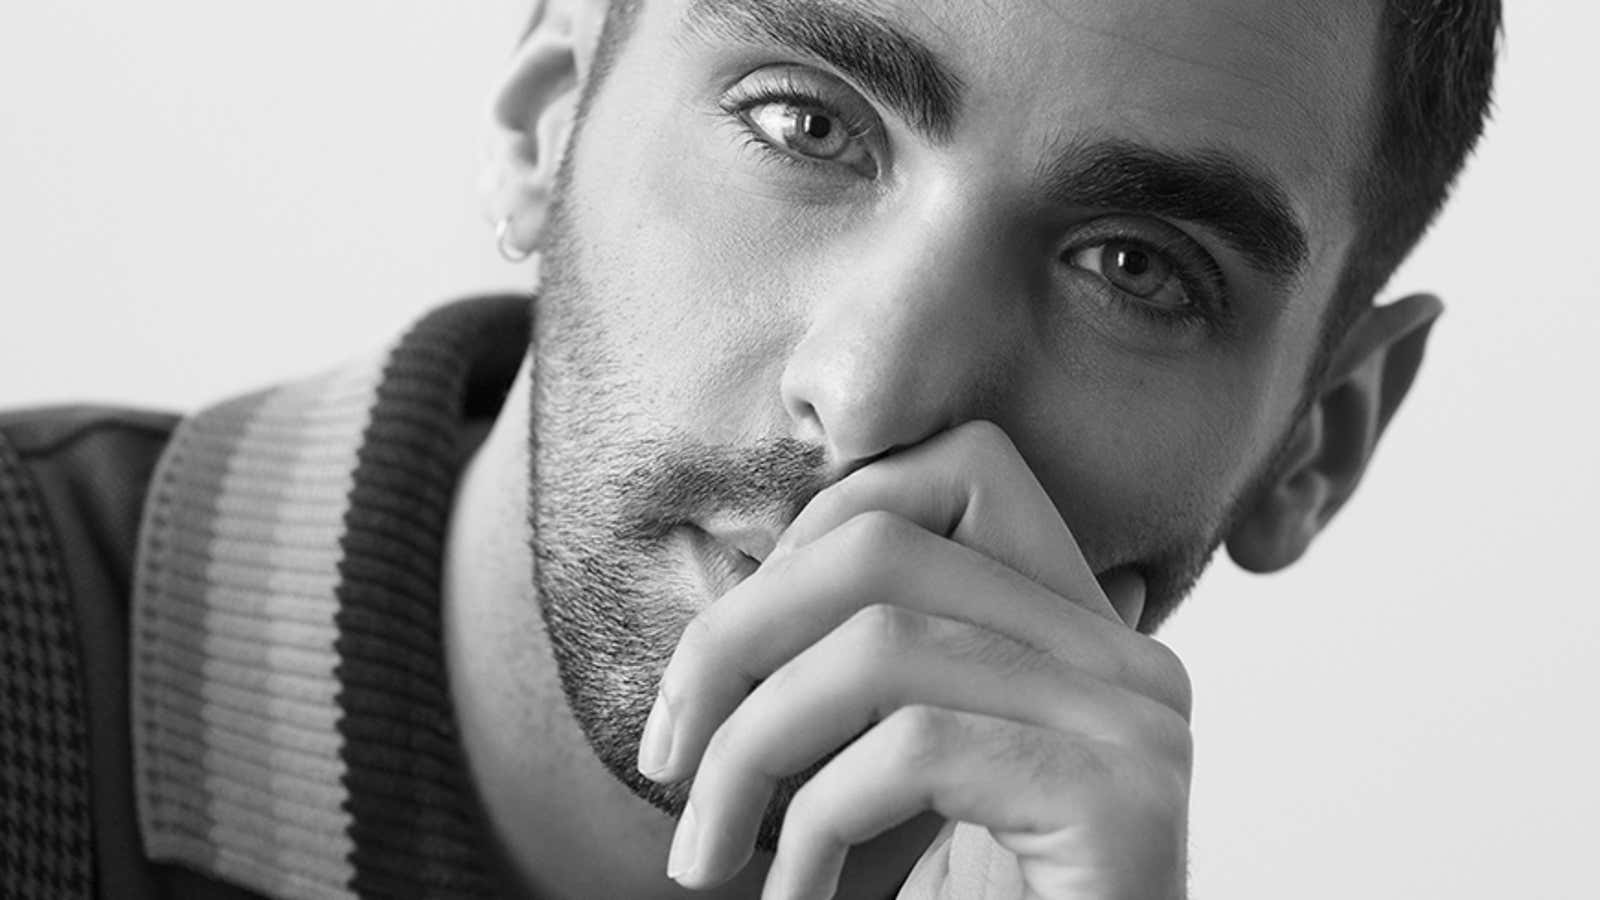 Phillip Picardi reveals how he responds when men (himself included) act sexist